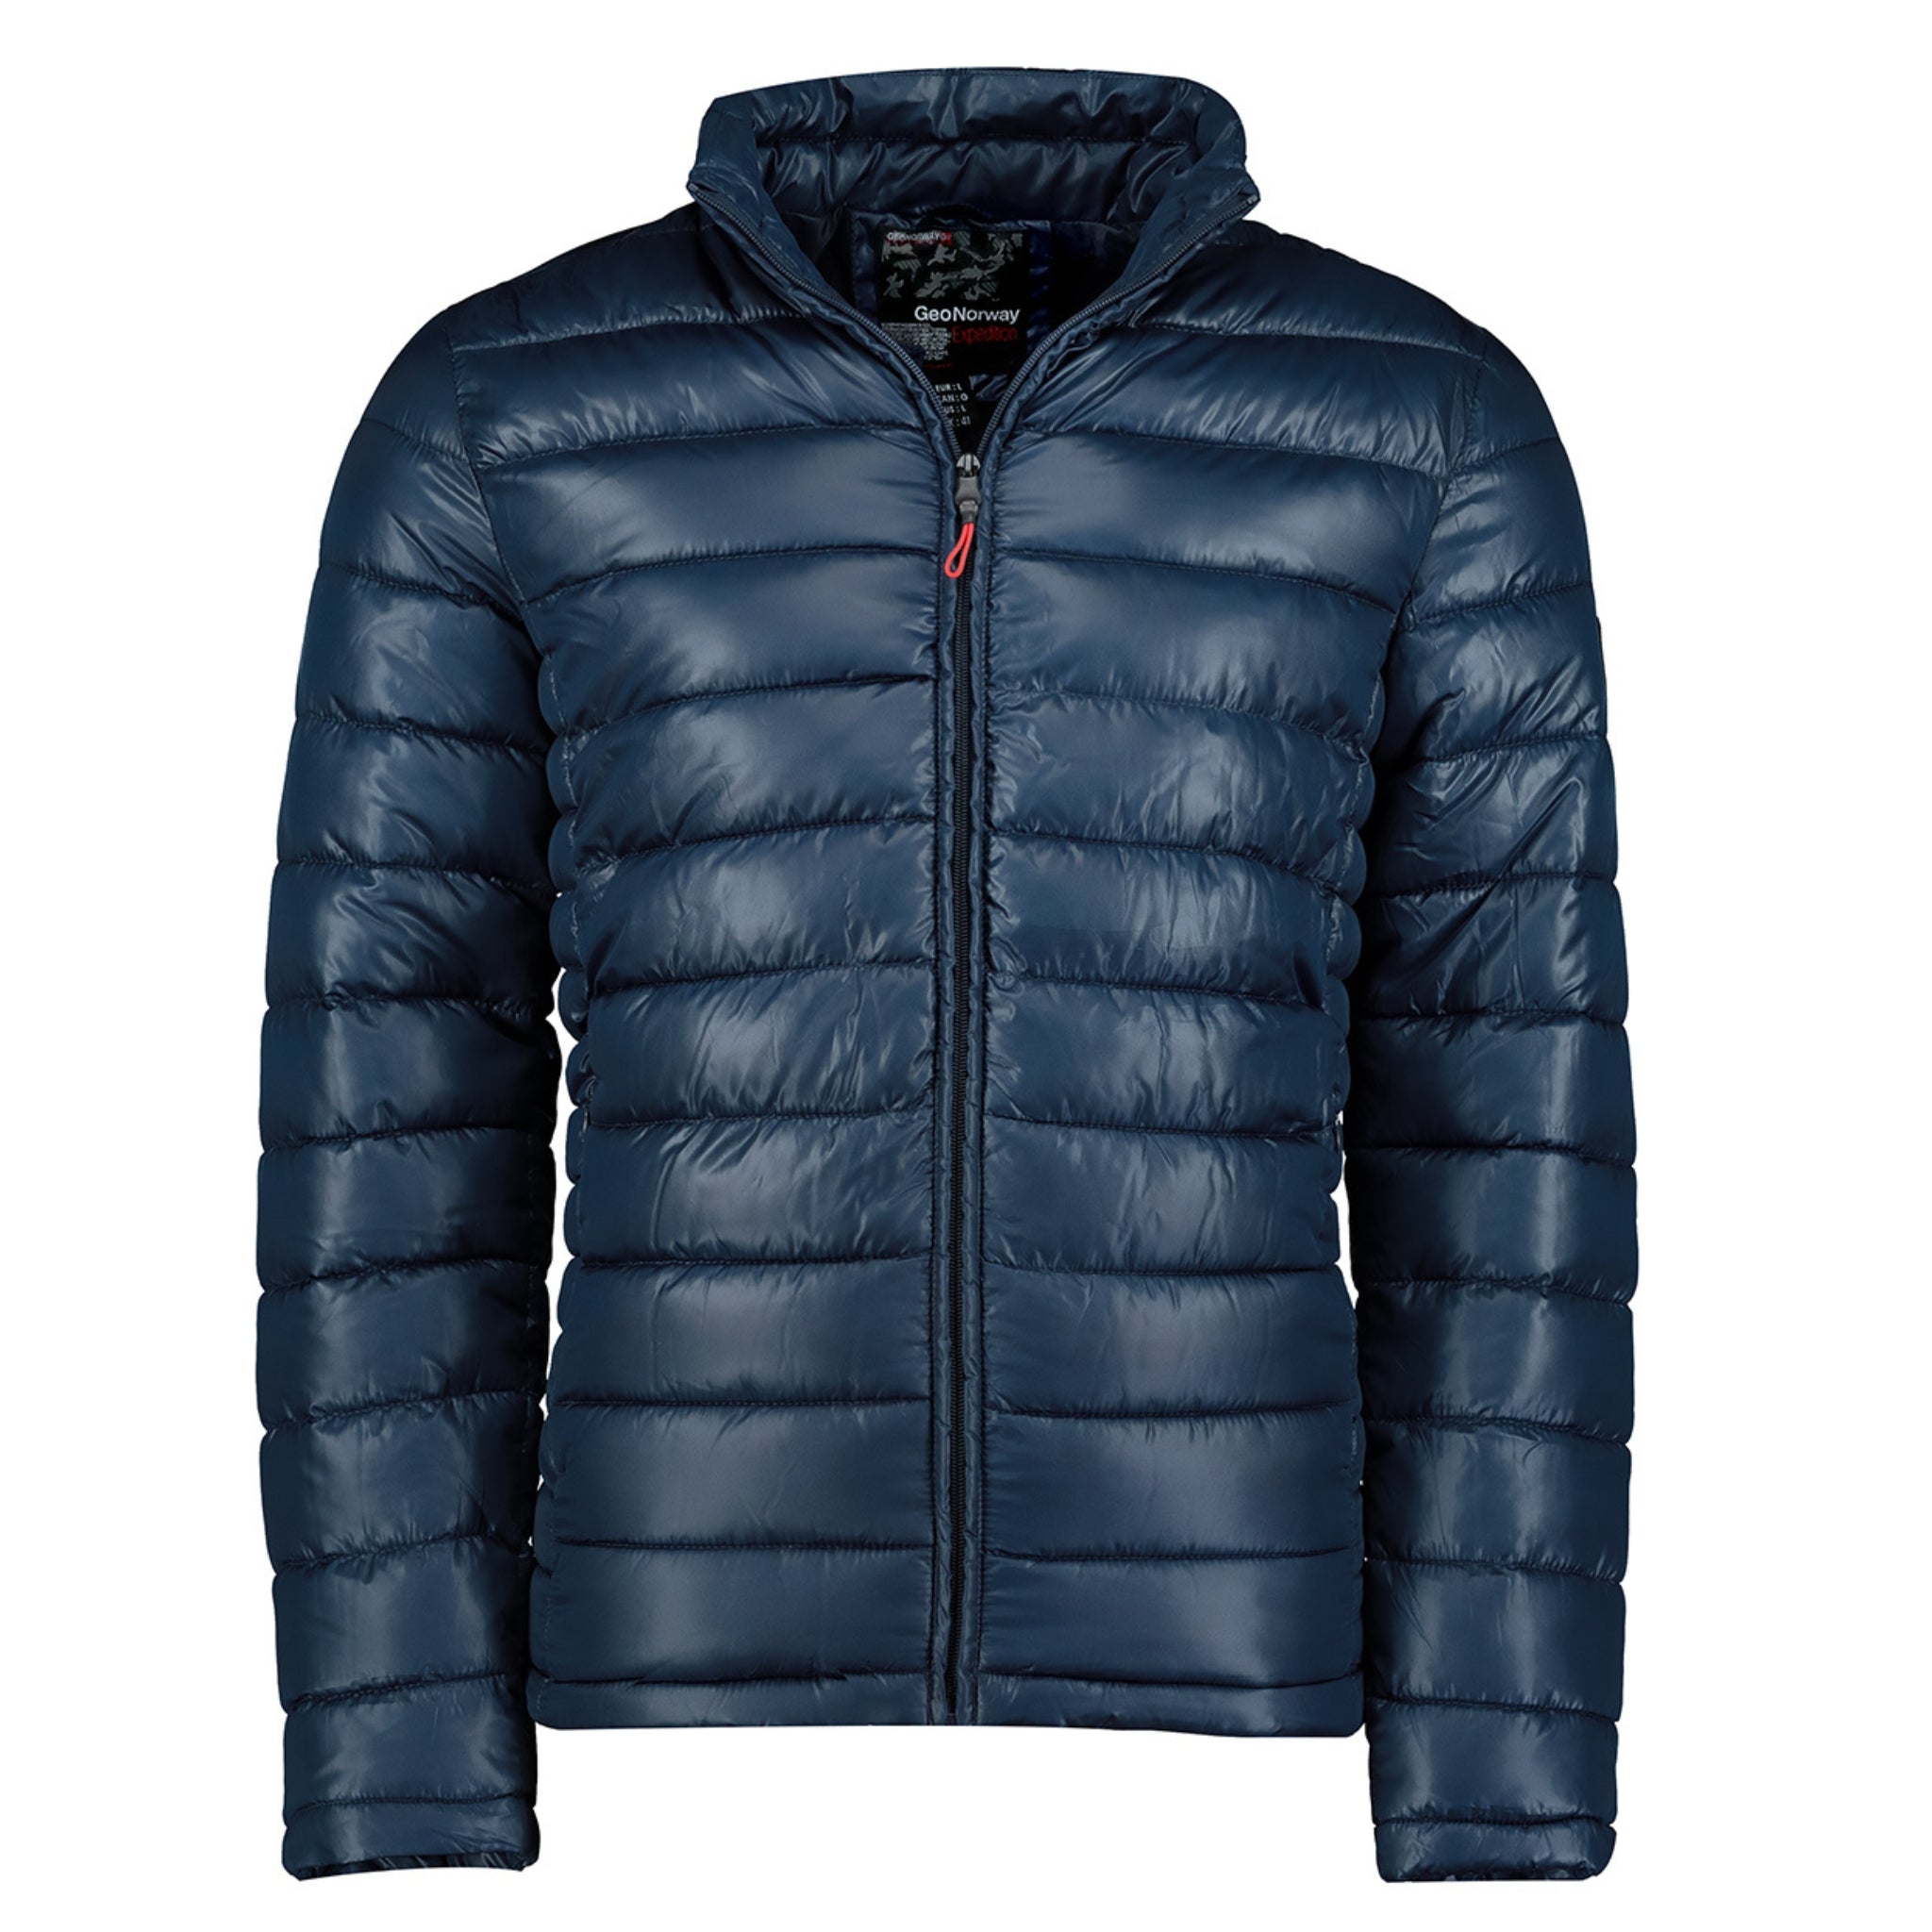 Geographical Norway Calender Homme - Light jacket